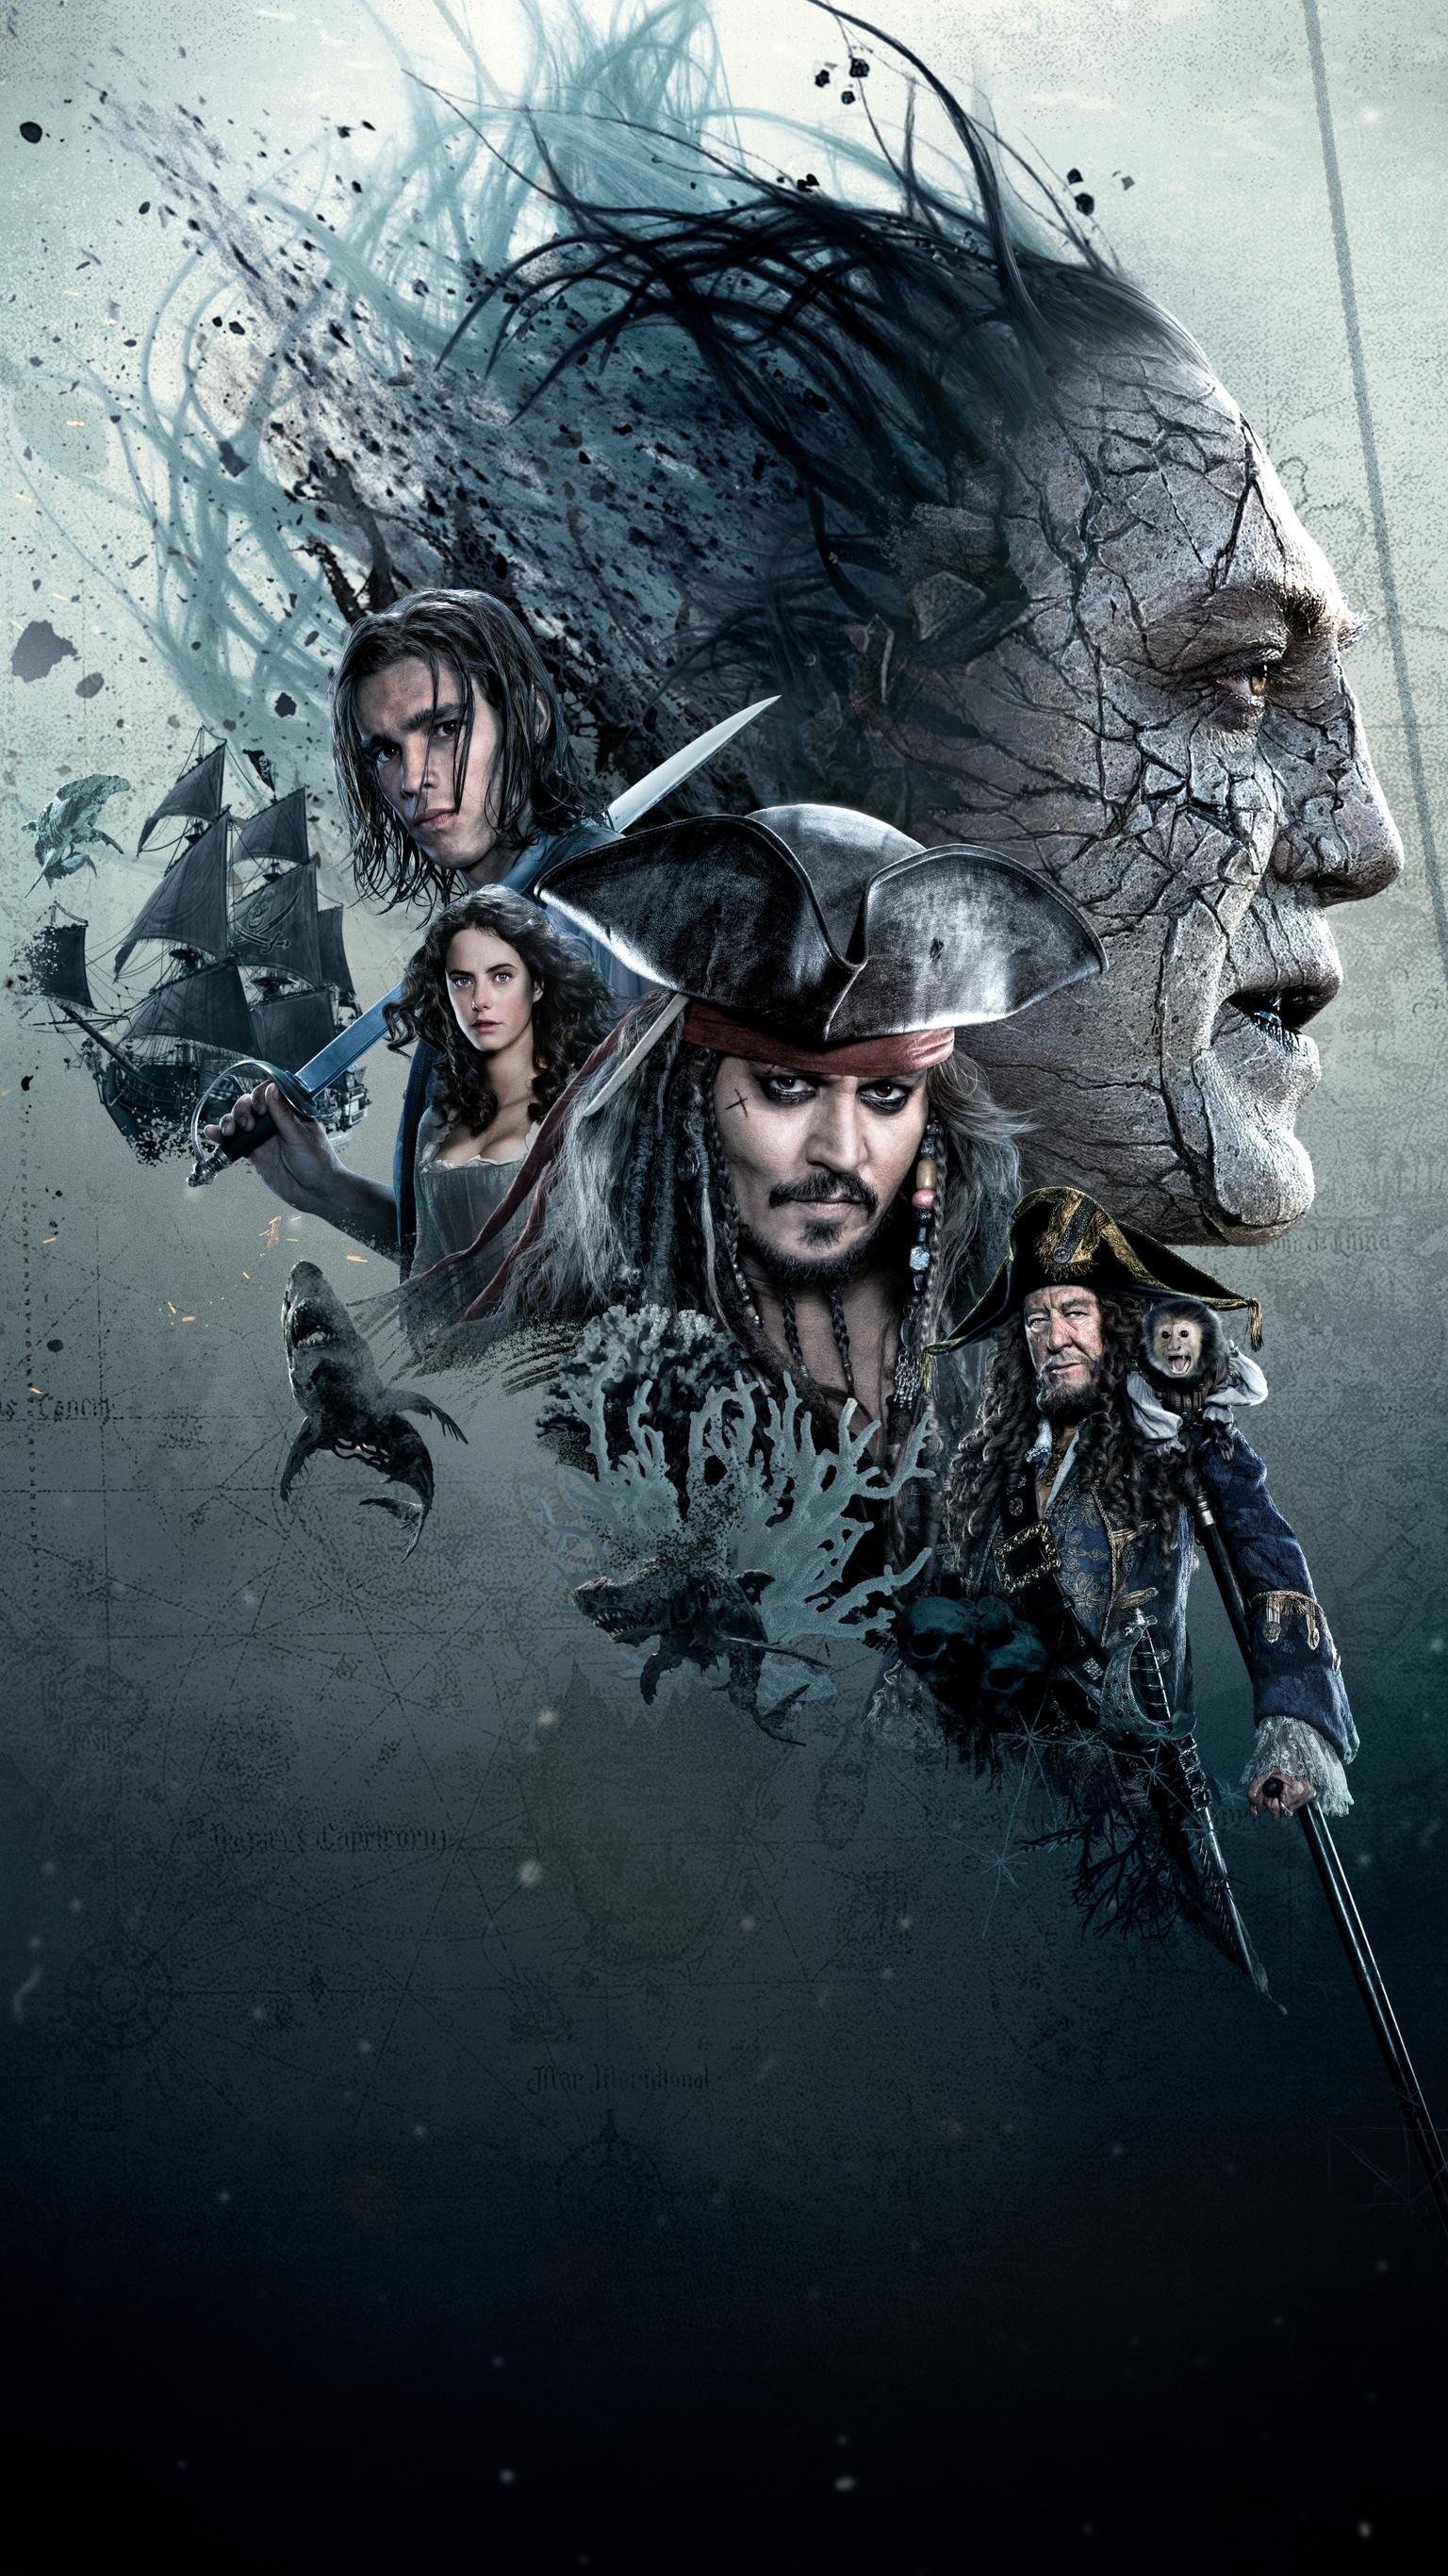 Mobile wallpaper: Pirate, Fantasy, 543946 download the picture for free.